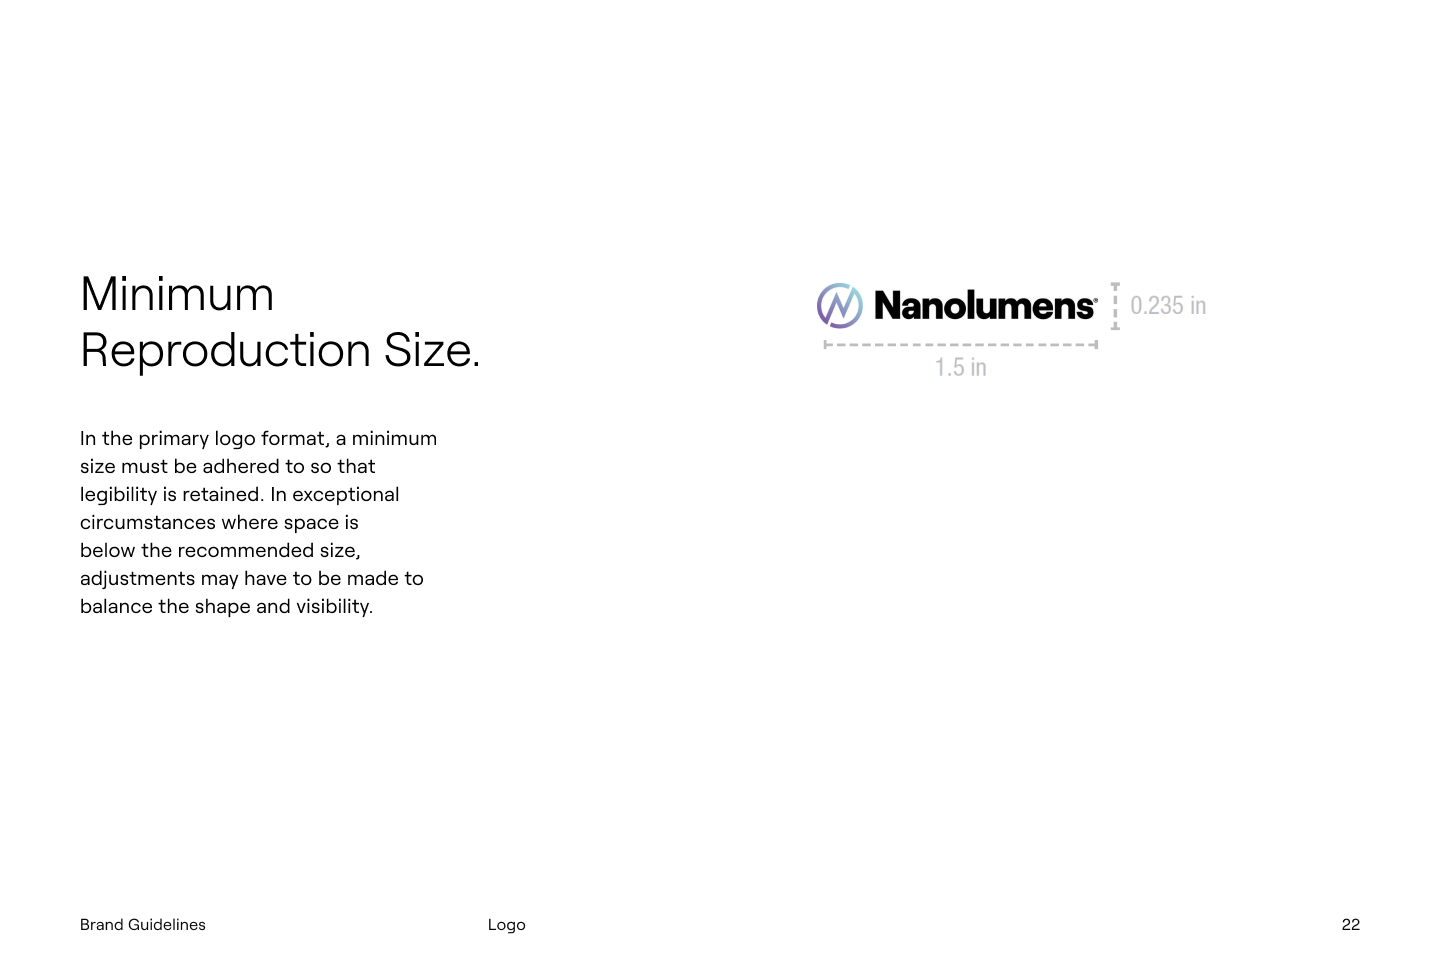 Nanolumens_Brand_Guidelines_2021_Page_22 1.png